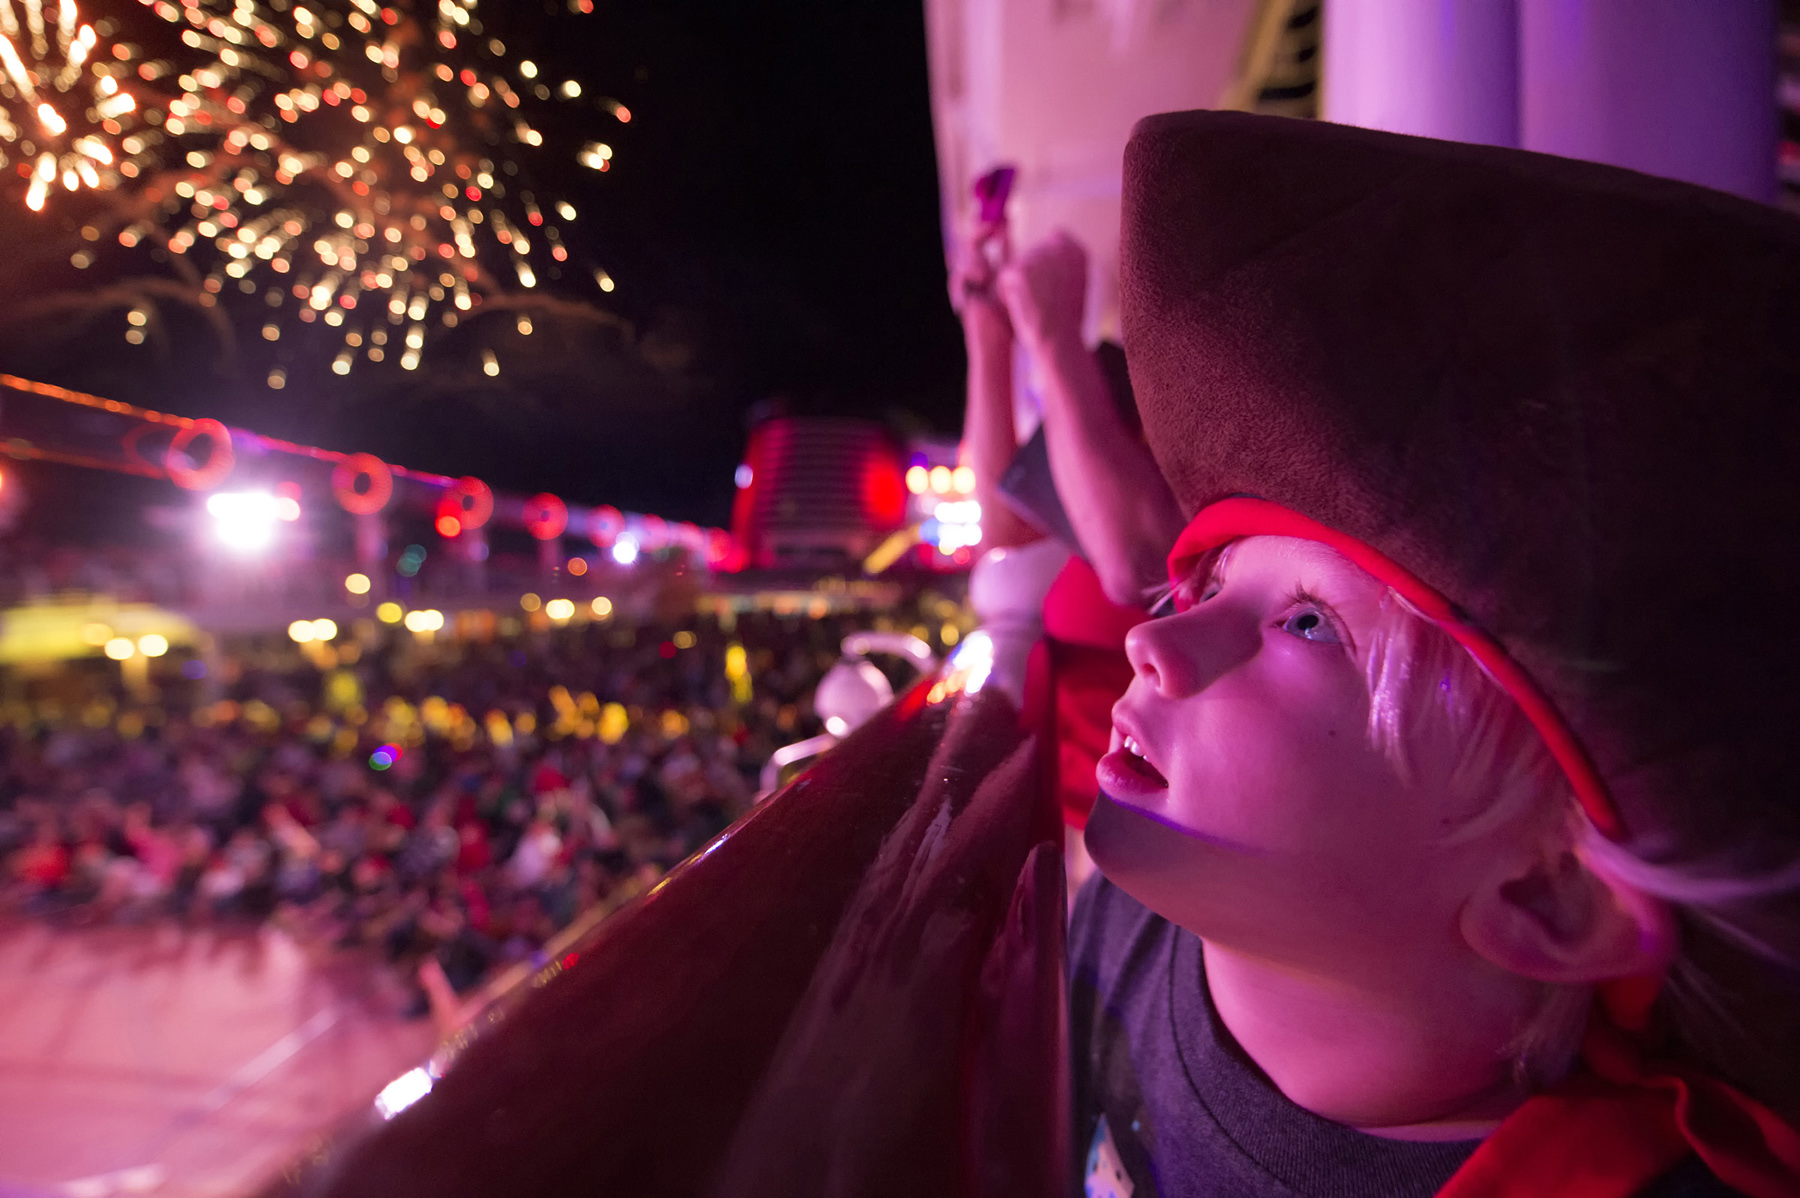 Little boy in pirate costume celebrating Pirate Night on Disney cruise ship with fireworks in the background (source: Disney Cruise Line)